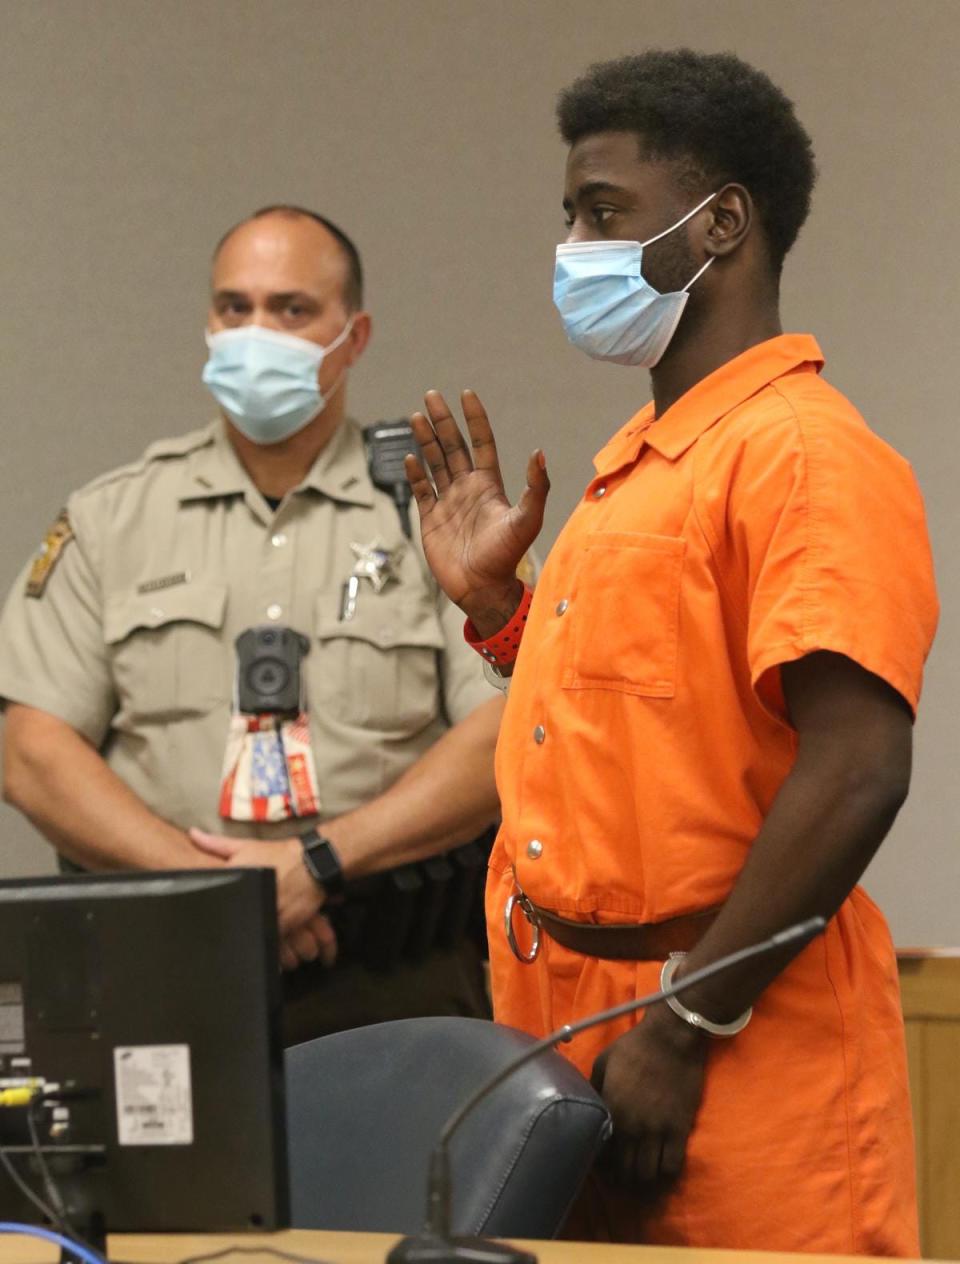 Markevion Antwan Weldon, 19, makes his first appearance before District Court Judge Pennie M. Thrower on Thursday afternoon, Sept. 10, 2020, at the Gaston County Courthouse.